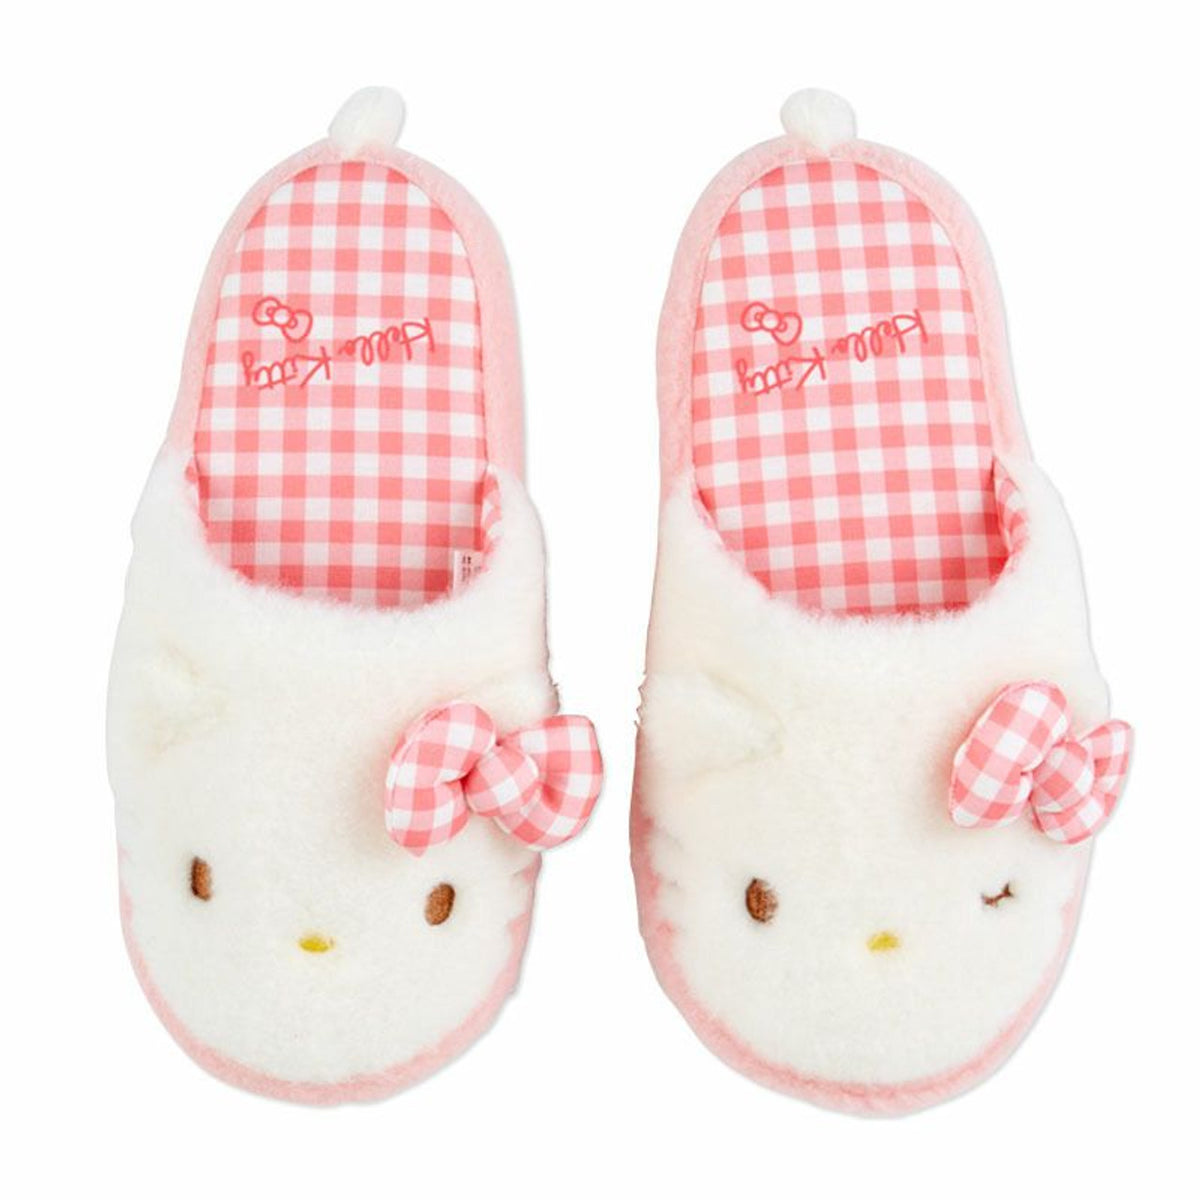 Hello Kitty Adult Slippers Shoes Japan Original   